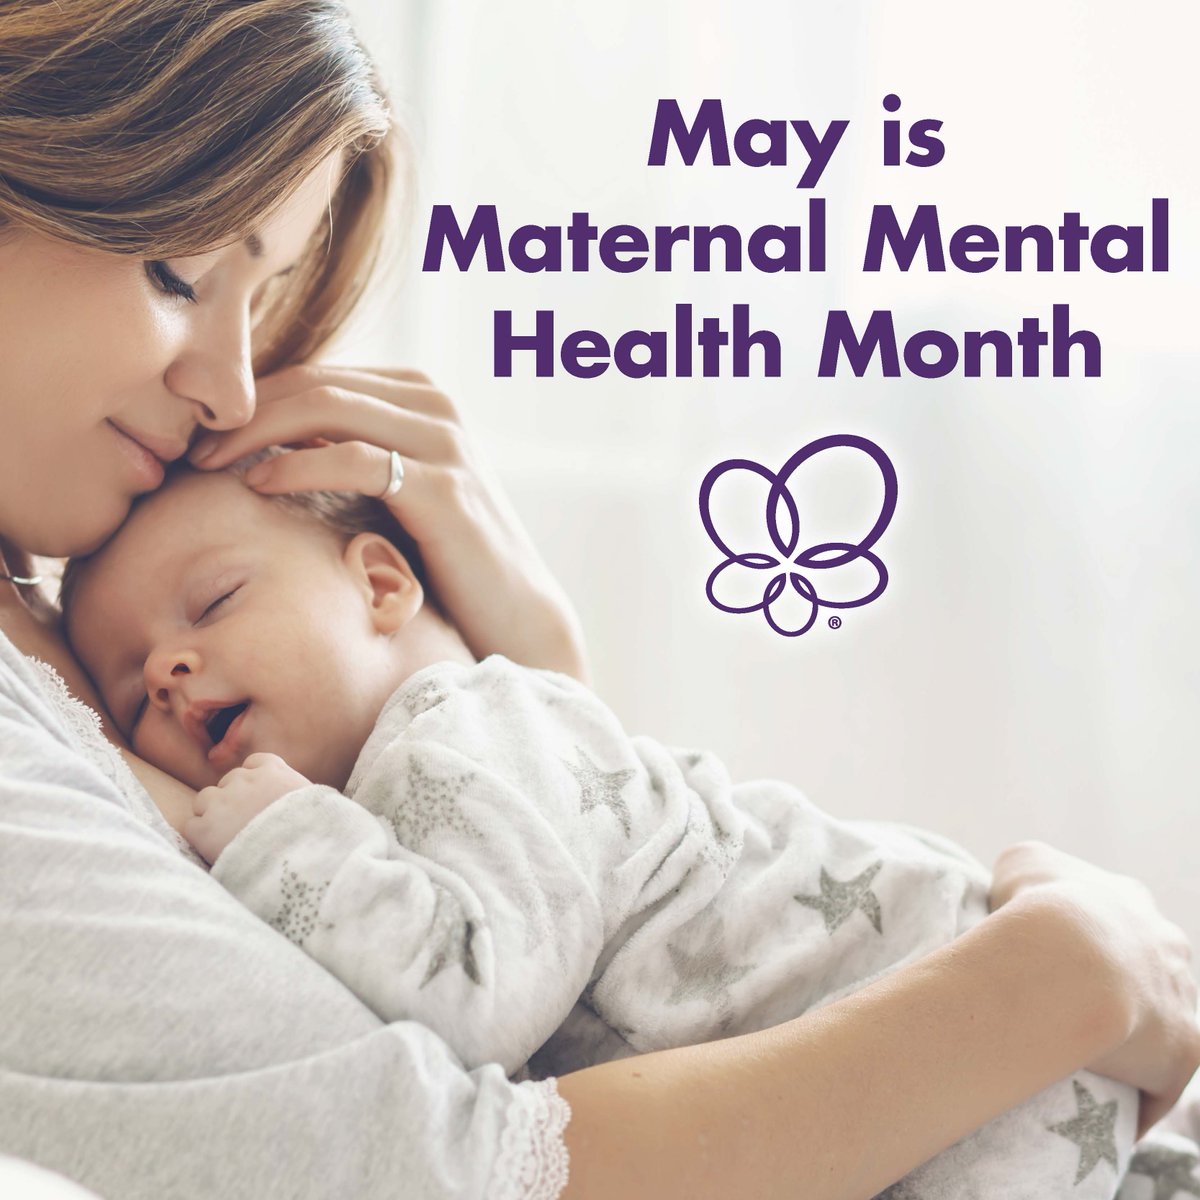 Pregnancy and parenthood bring joy, but they can also come with challenges. It's essential to prioritize mental health during this transformative journey. Are you struggling? The National Maternal Hotline can help: hubs.li/Q02w09ZP0